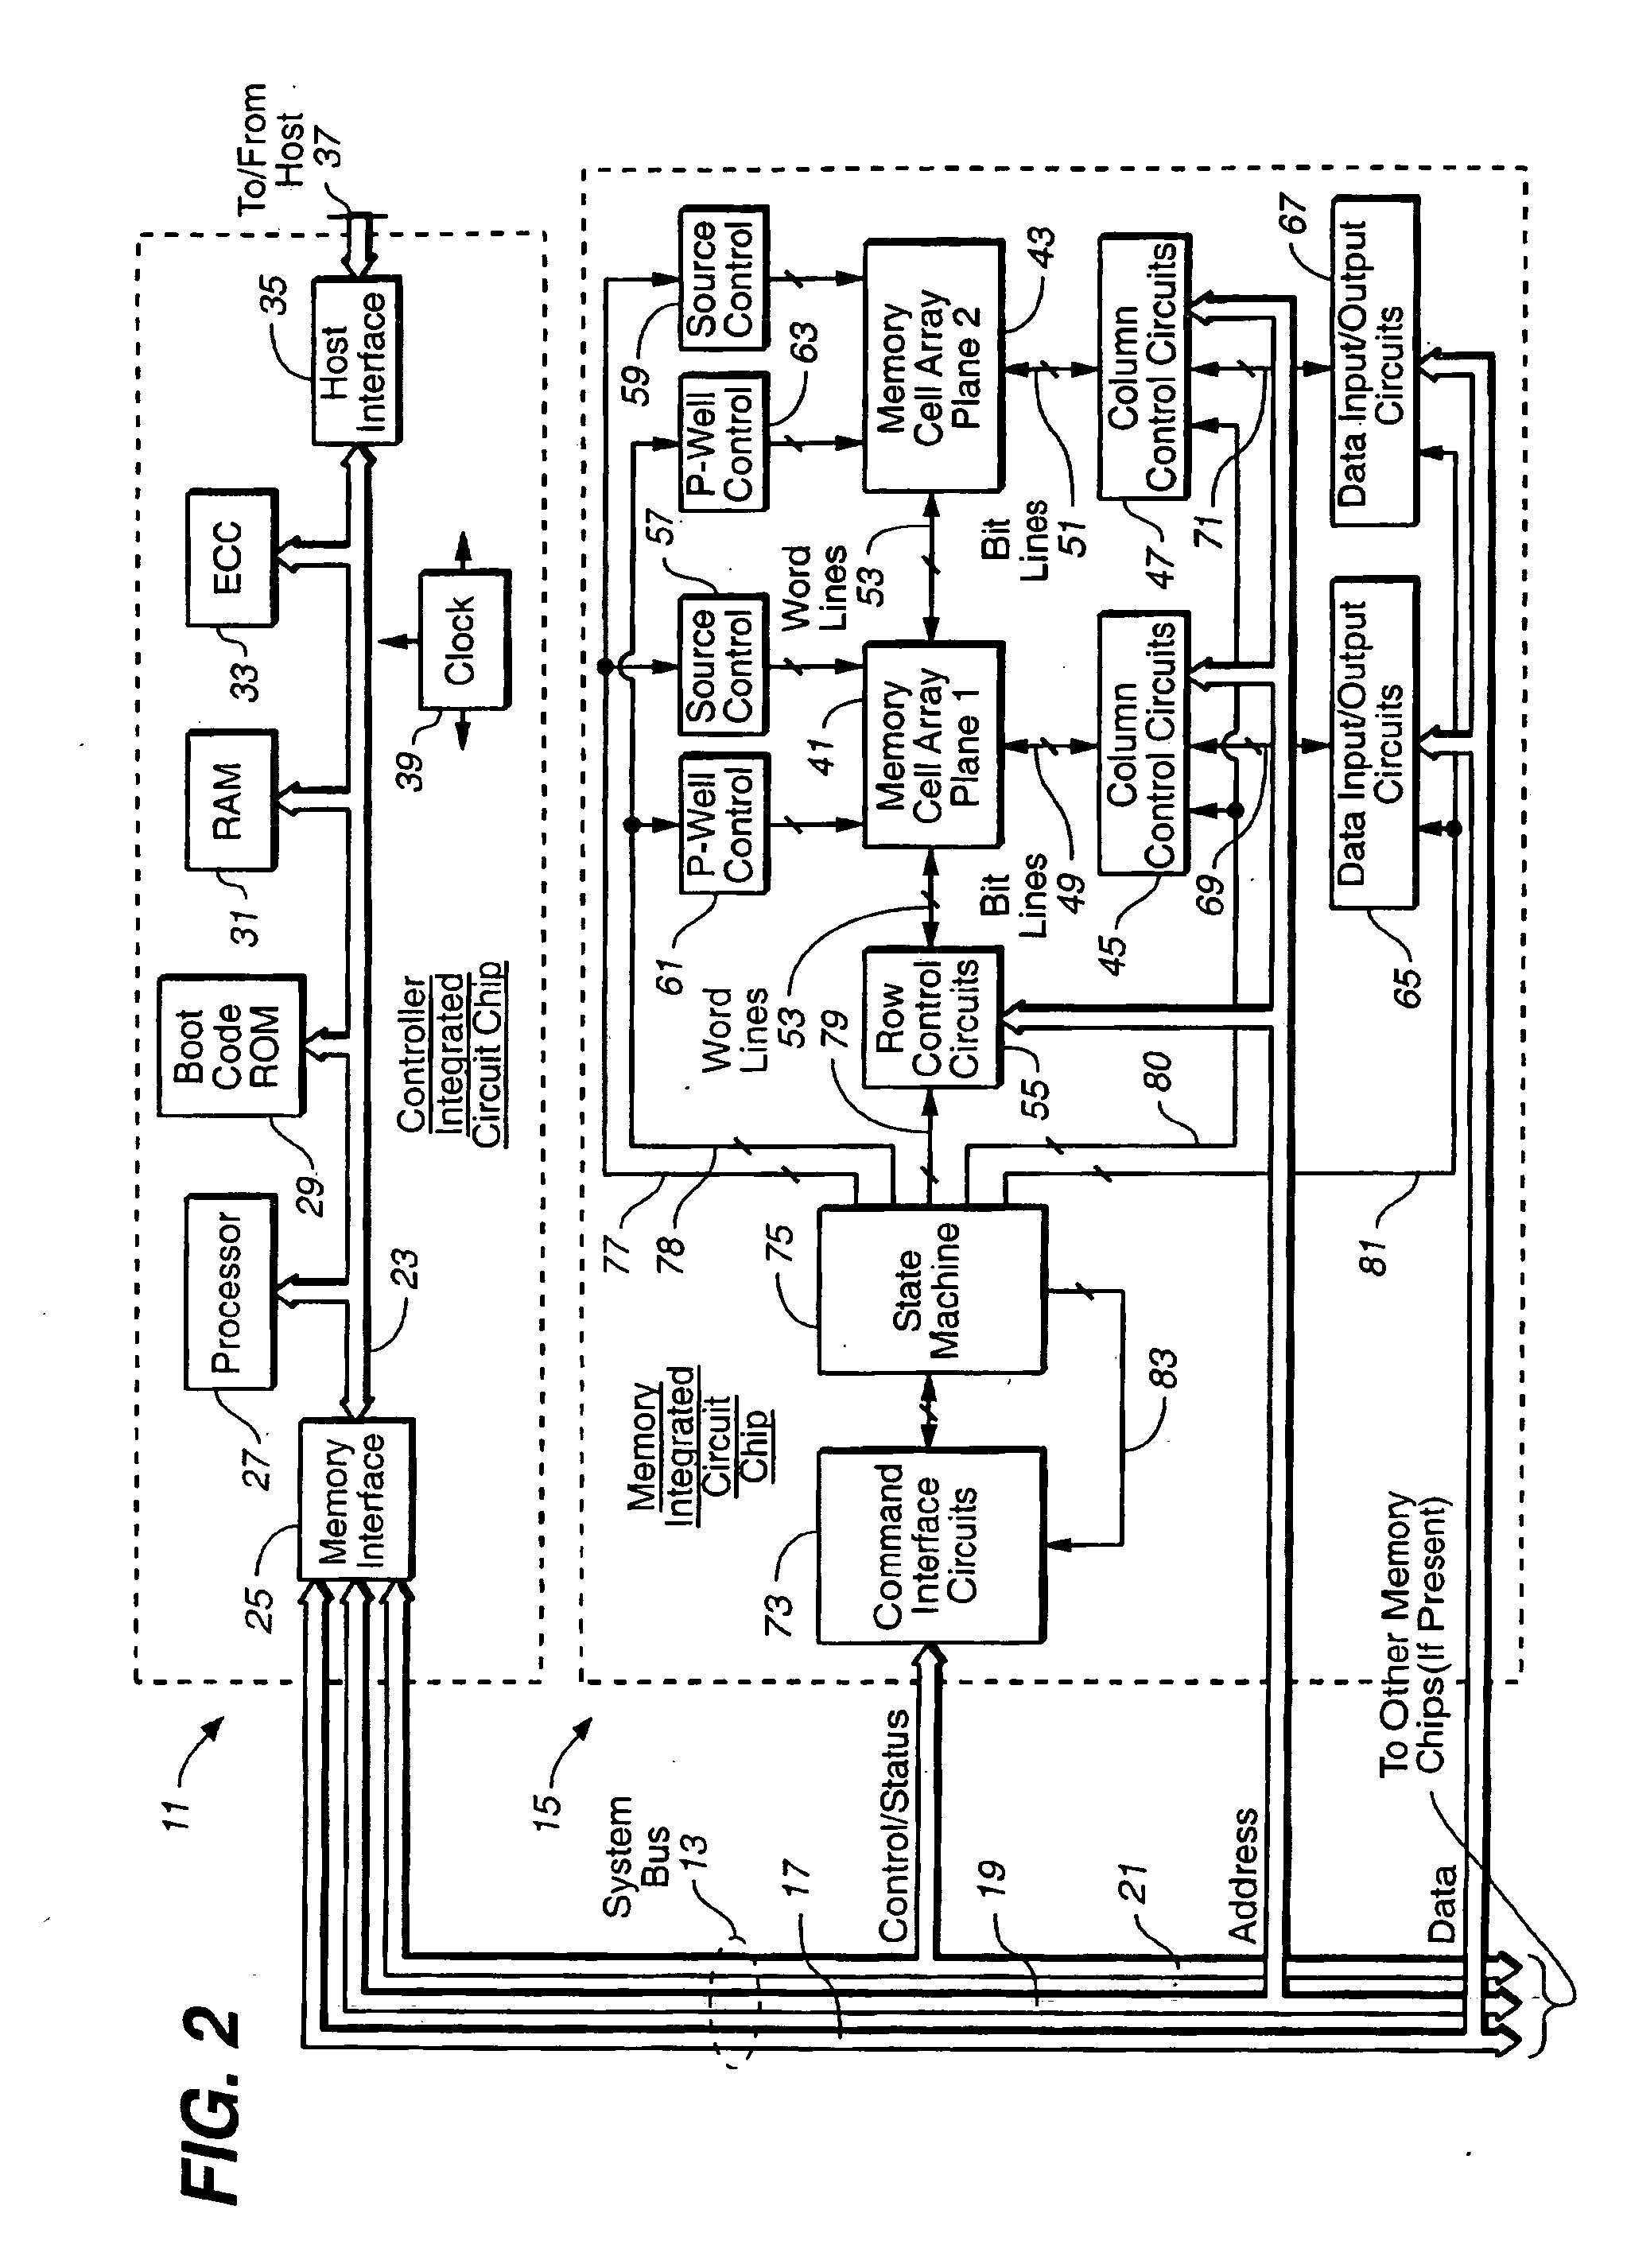 Methods for adaptive file data handling in non-volatile memories with a directly mapped file storage system